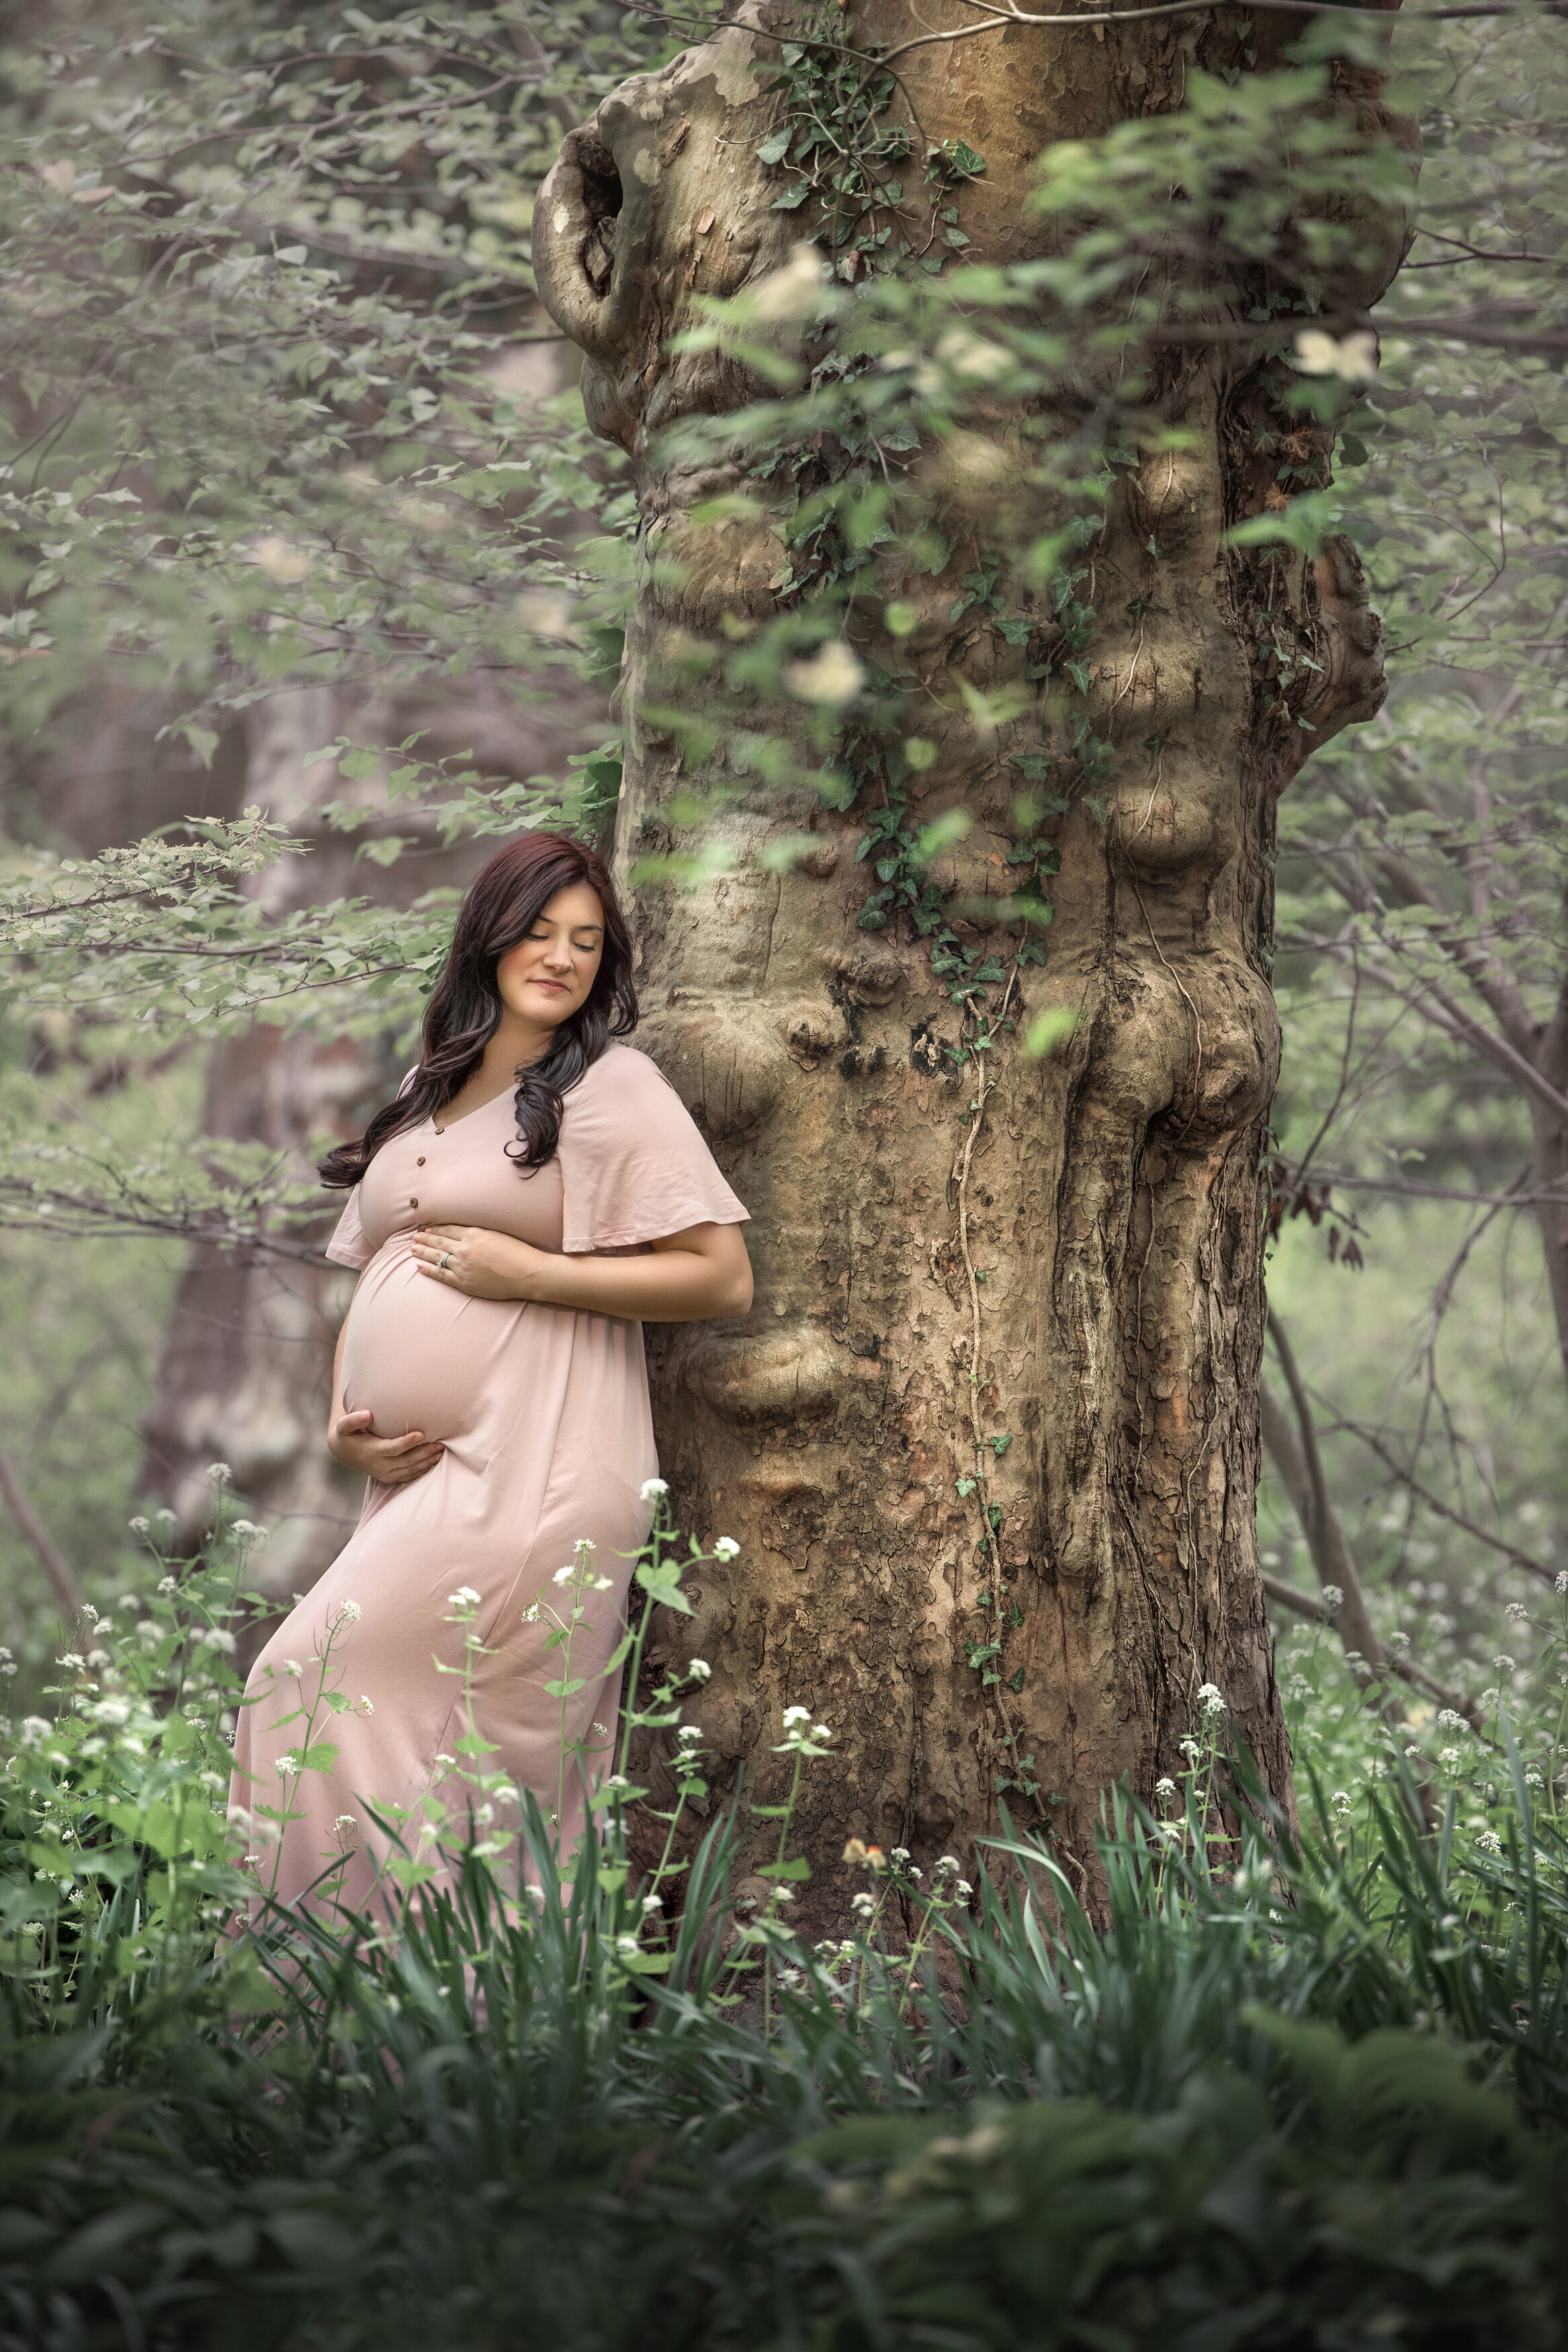 Pregnant woman hols belly for photos during maternity photography session at Sayen Gardens in Hamilton, New Jersey